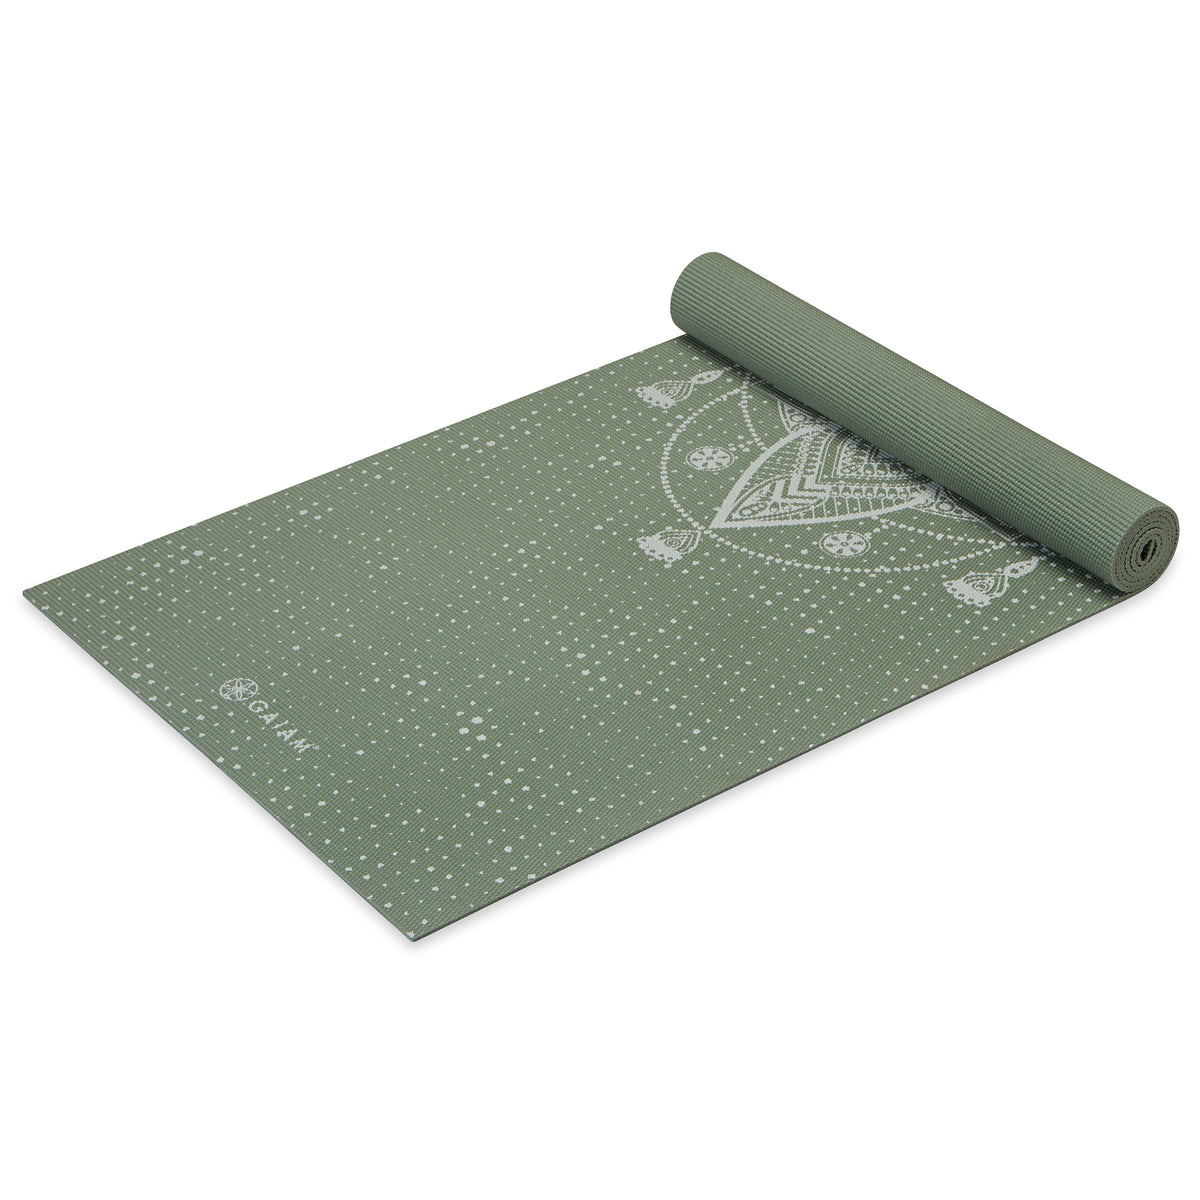 Gaiam Celestial Green Yoga Mat (5mm) top rolled angle